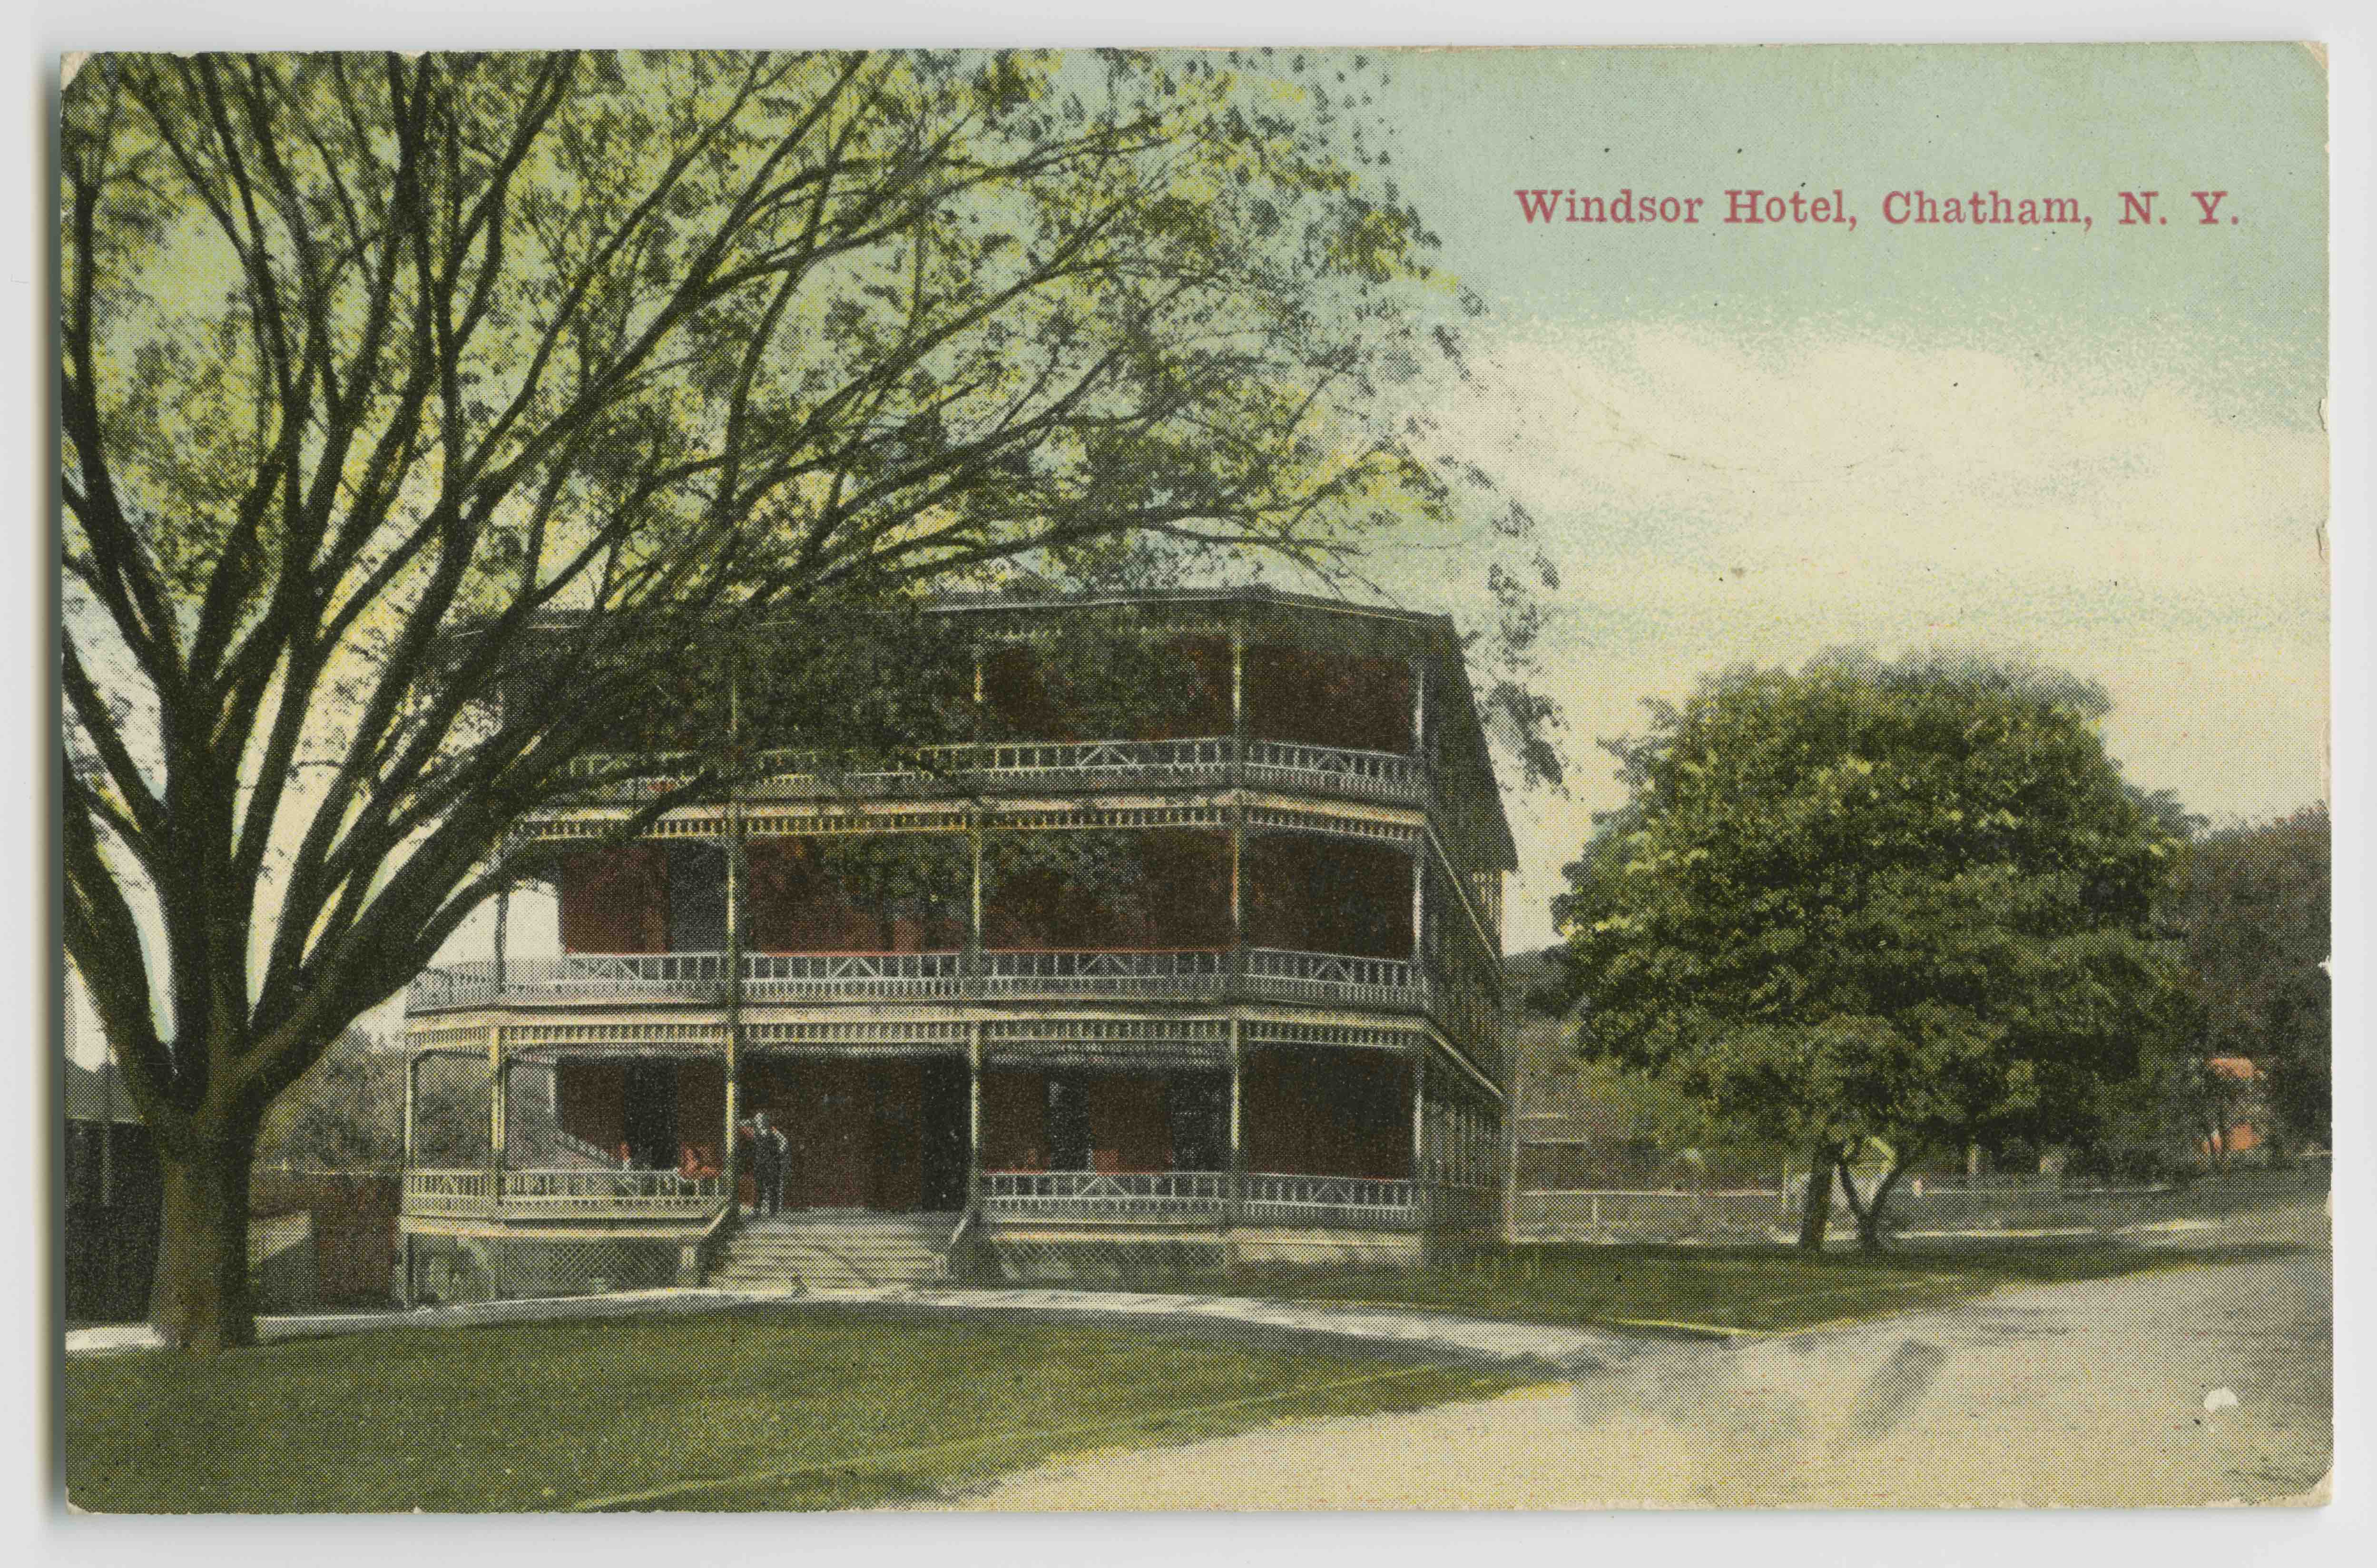 A postcard of a house with a tree in the background.